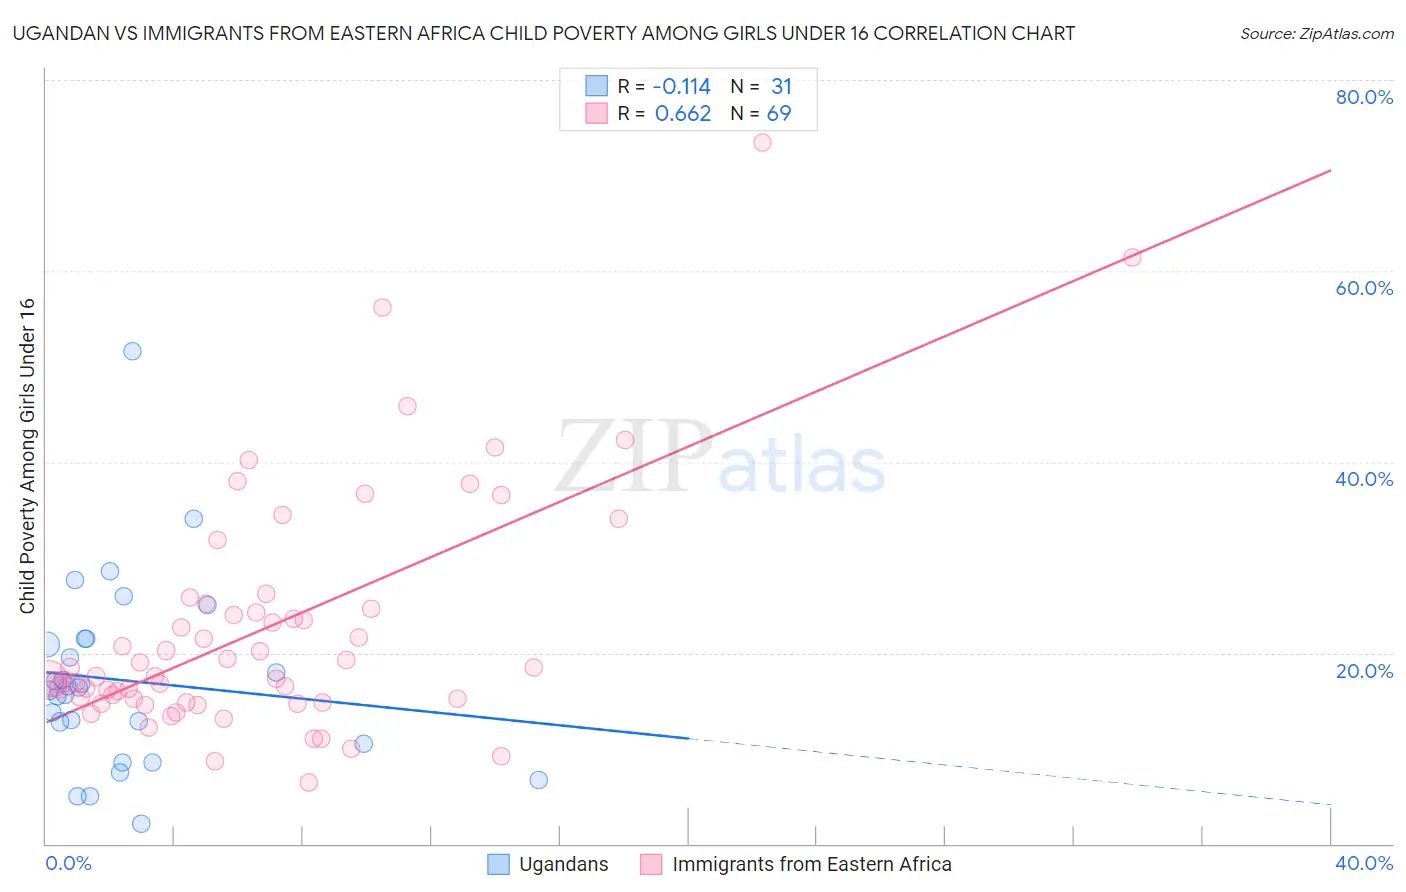 Ugandan vs Immigrants from Eastern Africa Child Poverty Among Girls Under 16